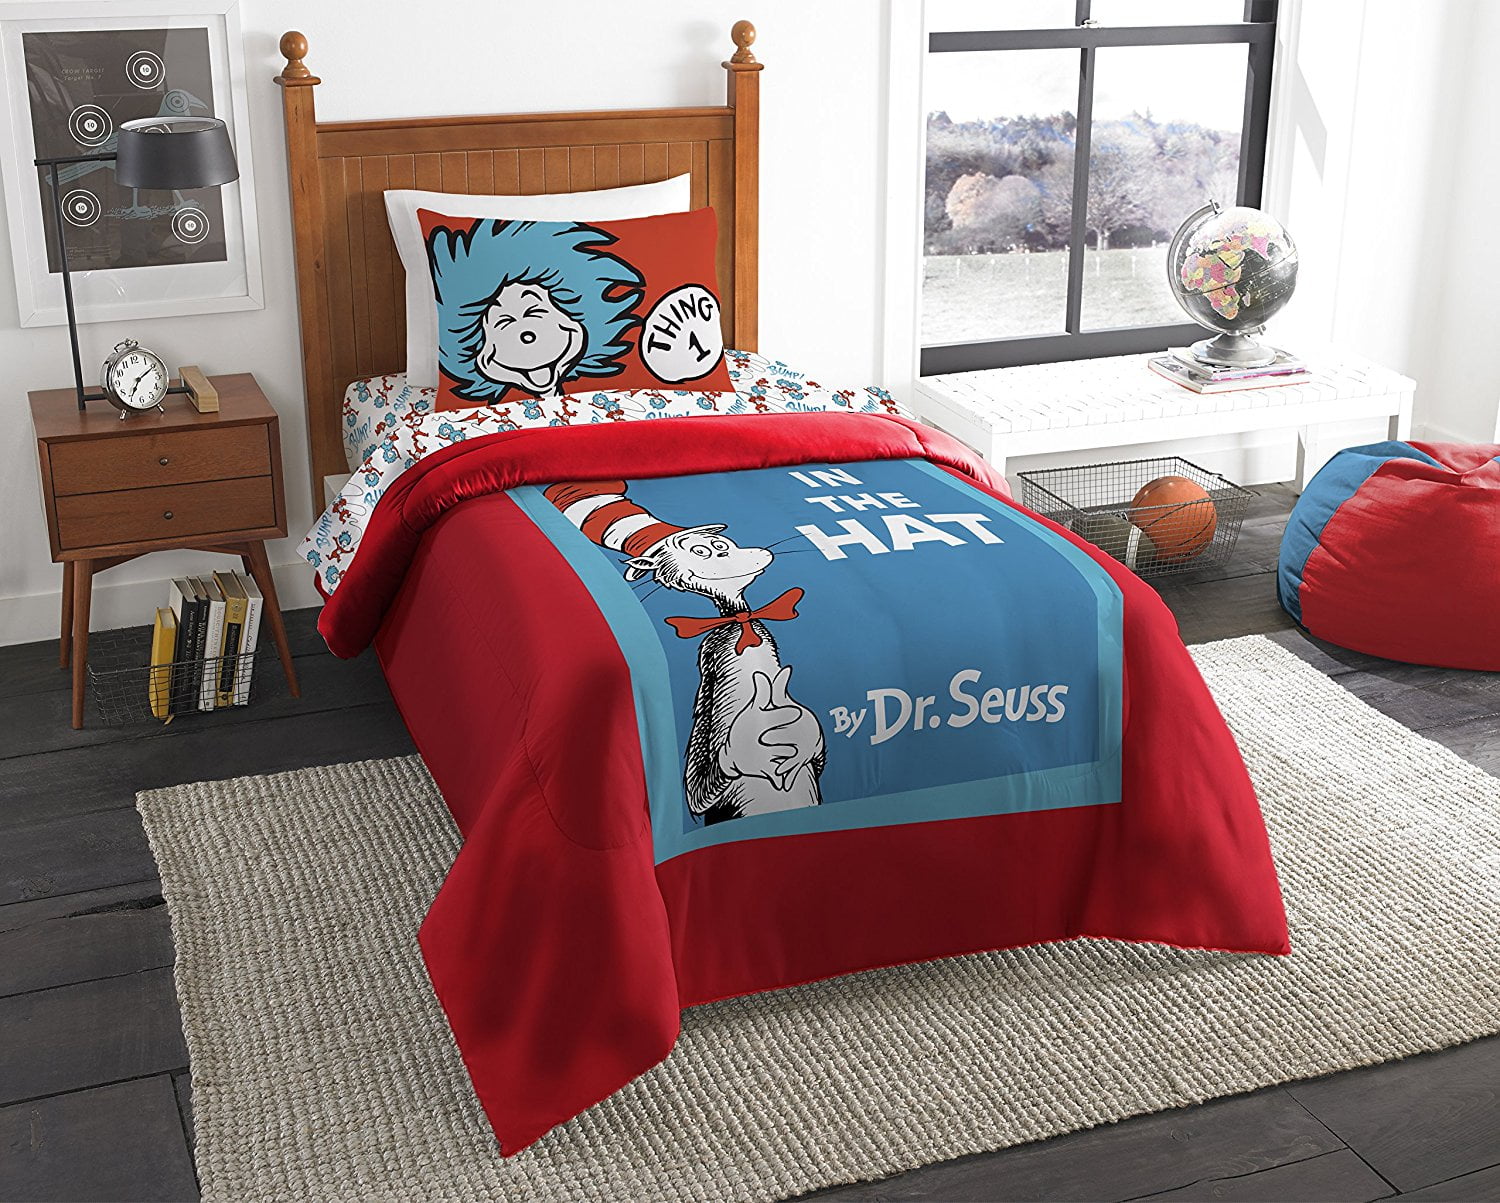 Dr Seuss Cat In The Hat Covers Twin, Dr Who Twin Bedding